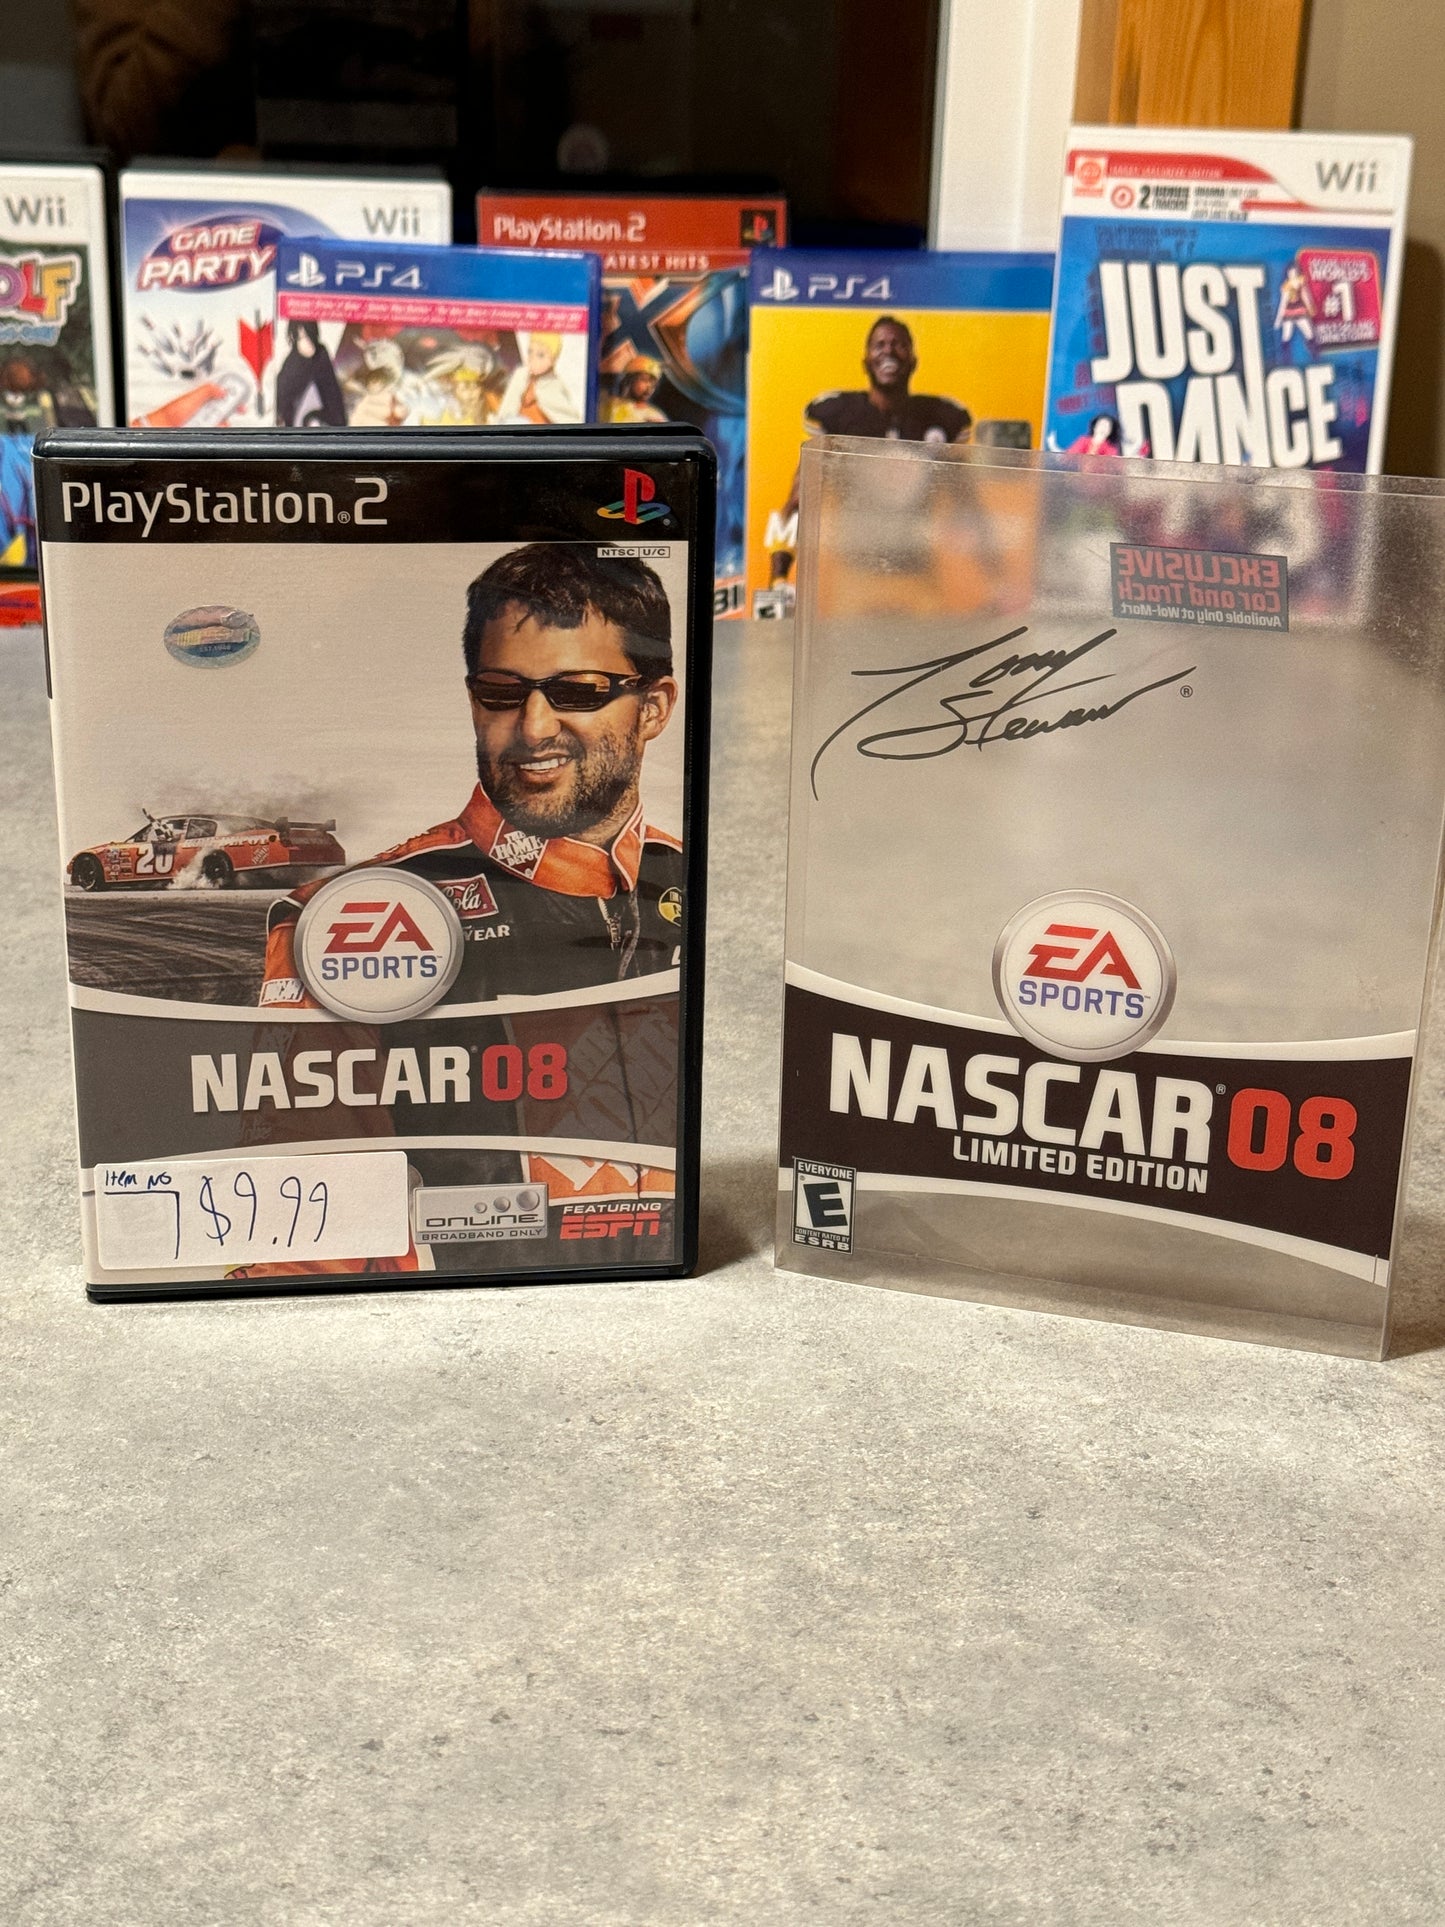 NASCAR 08 Limited Edition - PS2 Game